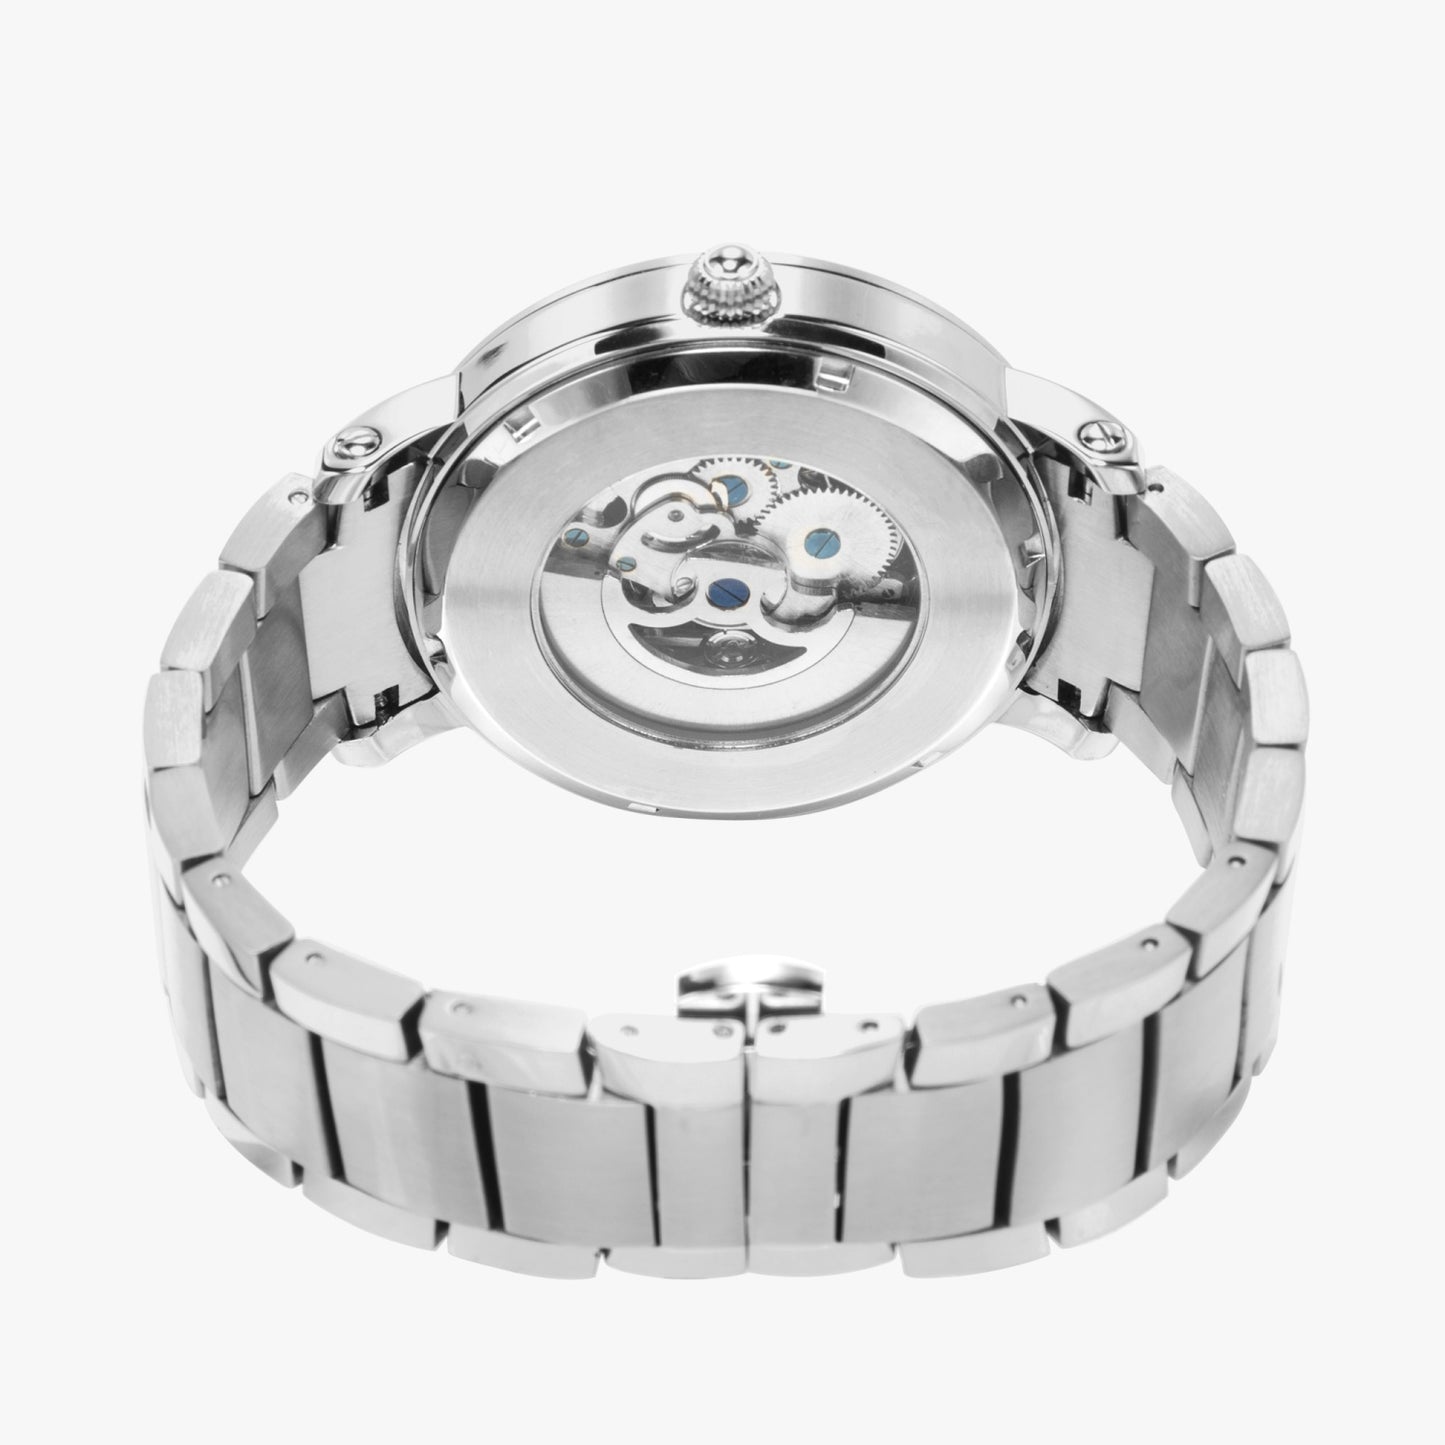 Italia stelle Automatic Movement Watch - Premium Stainless Steel